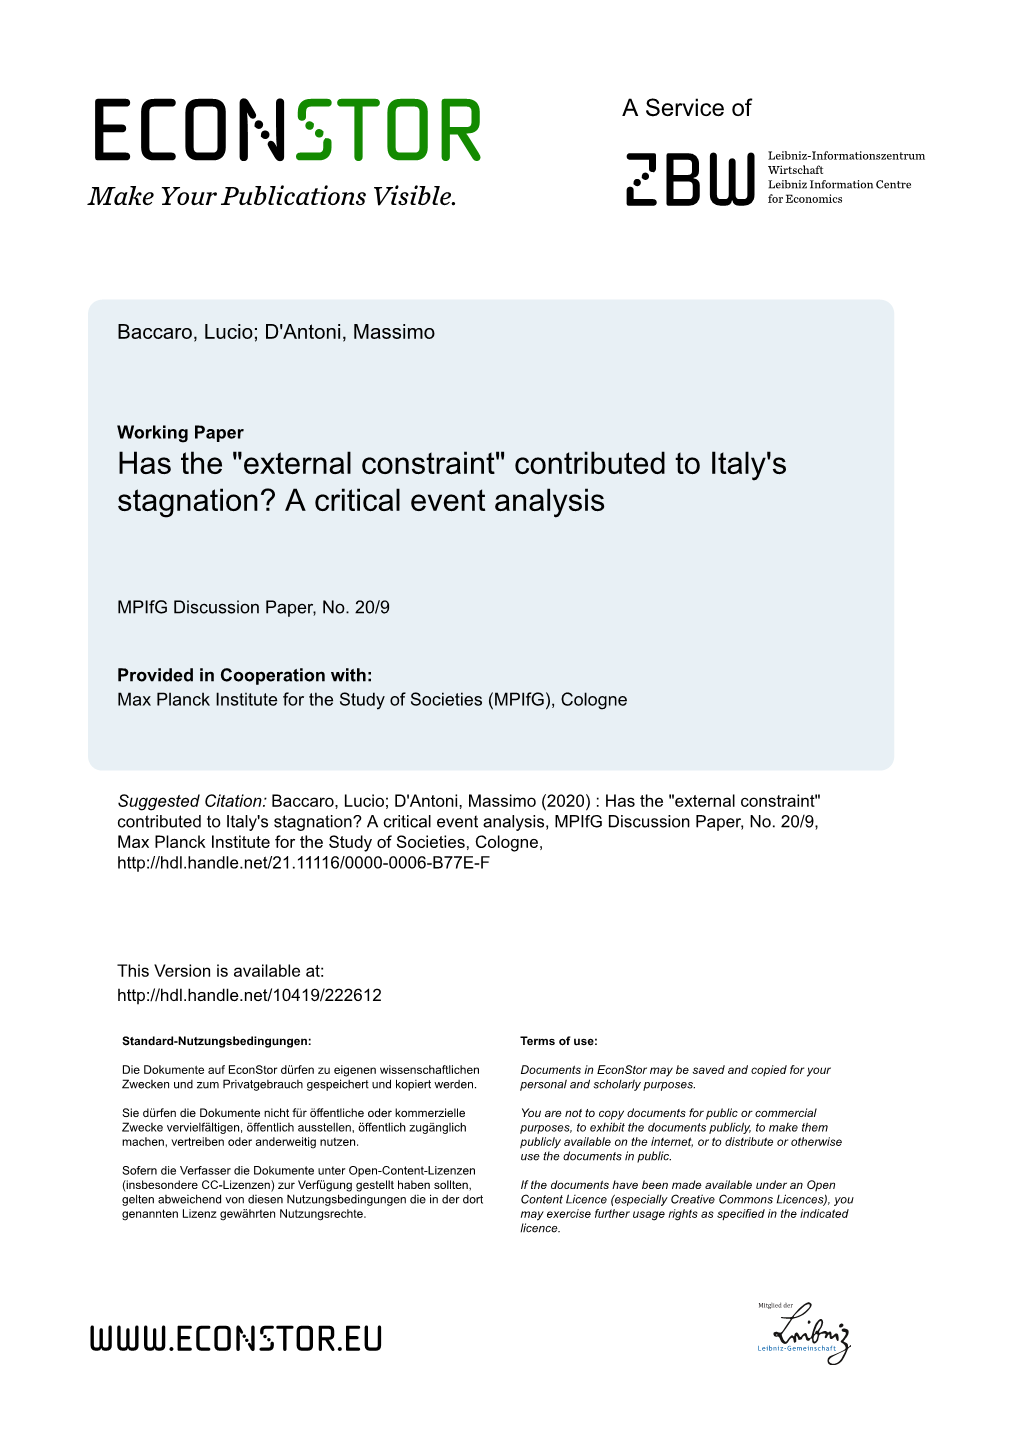 External Constraint" Contributed to Italy's Stagnation? a Critical Event Analysis